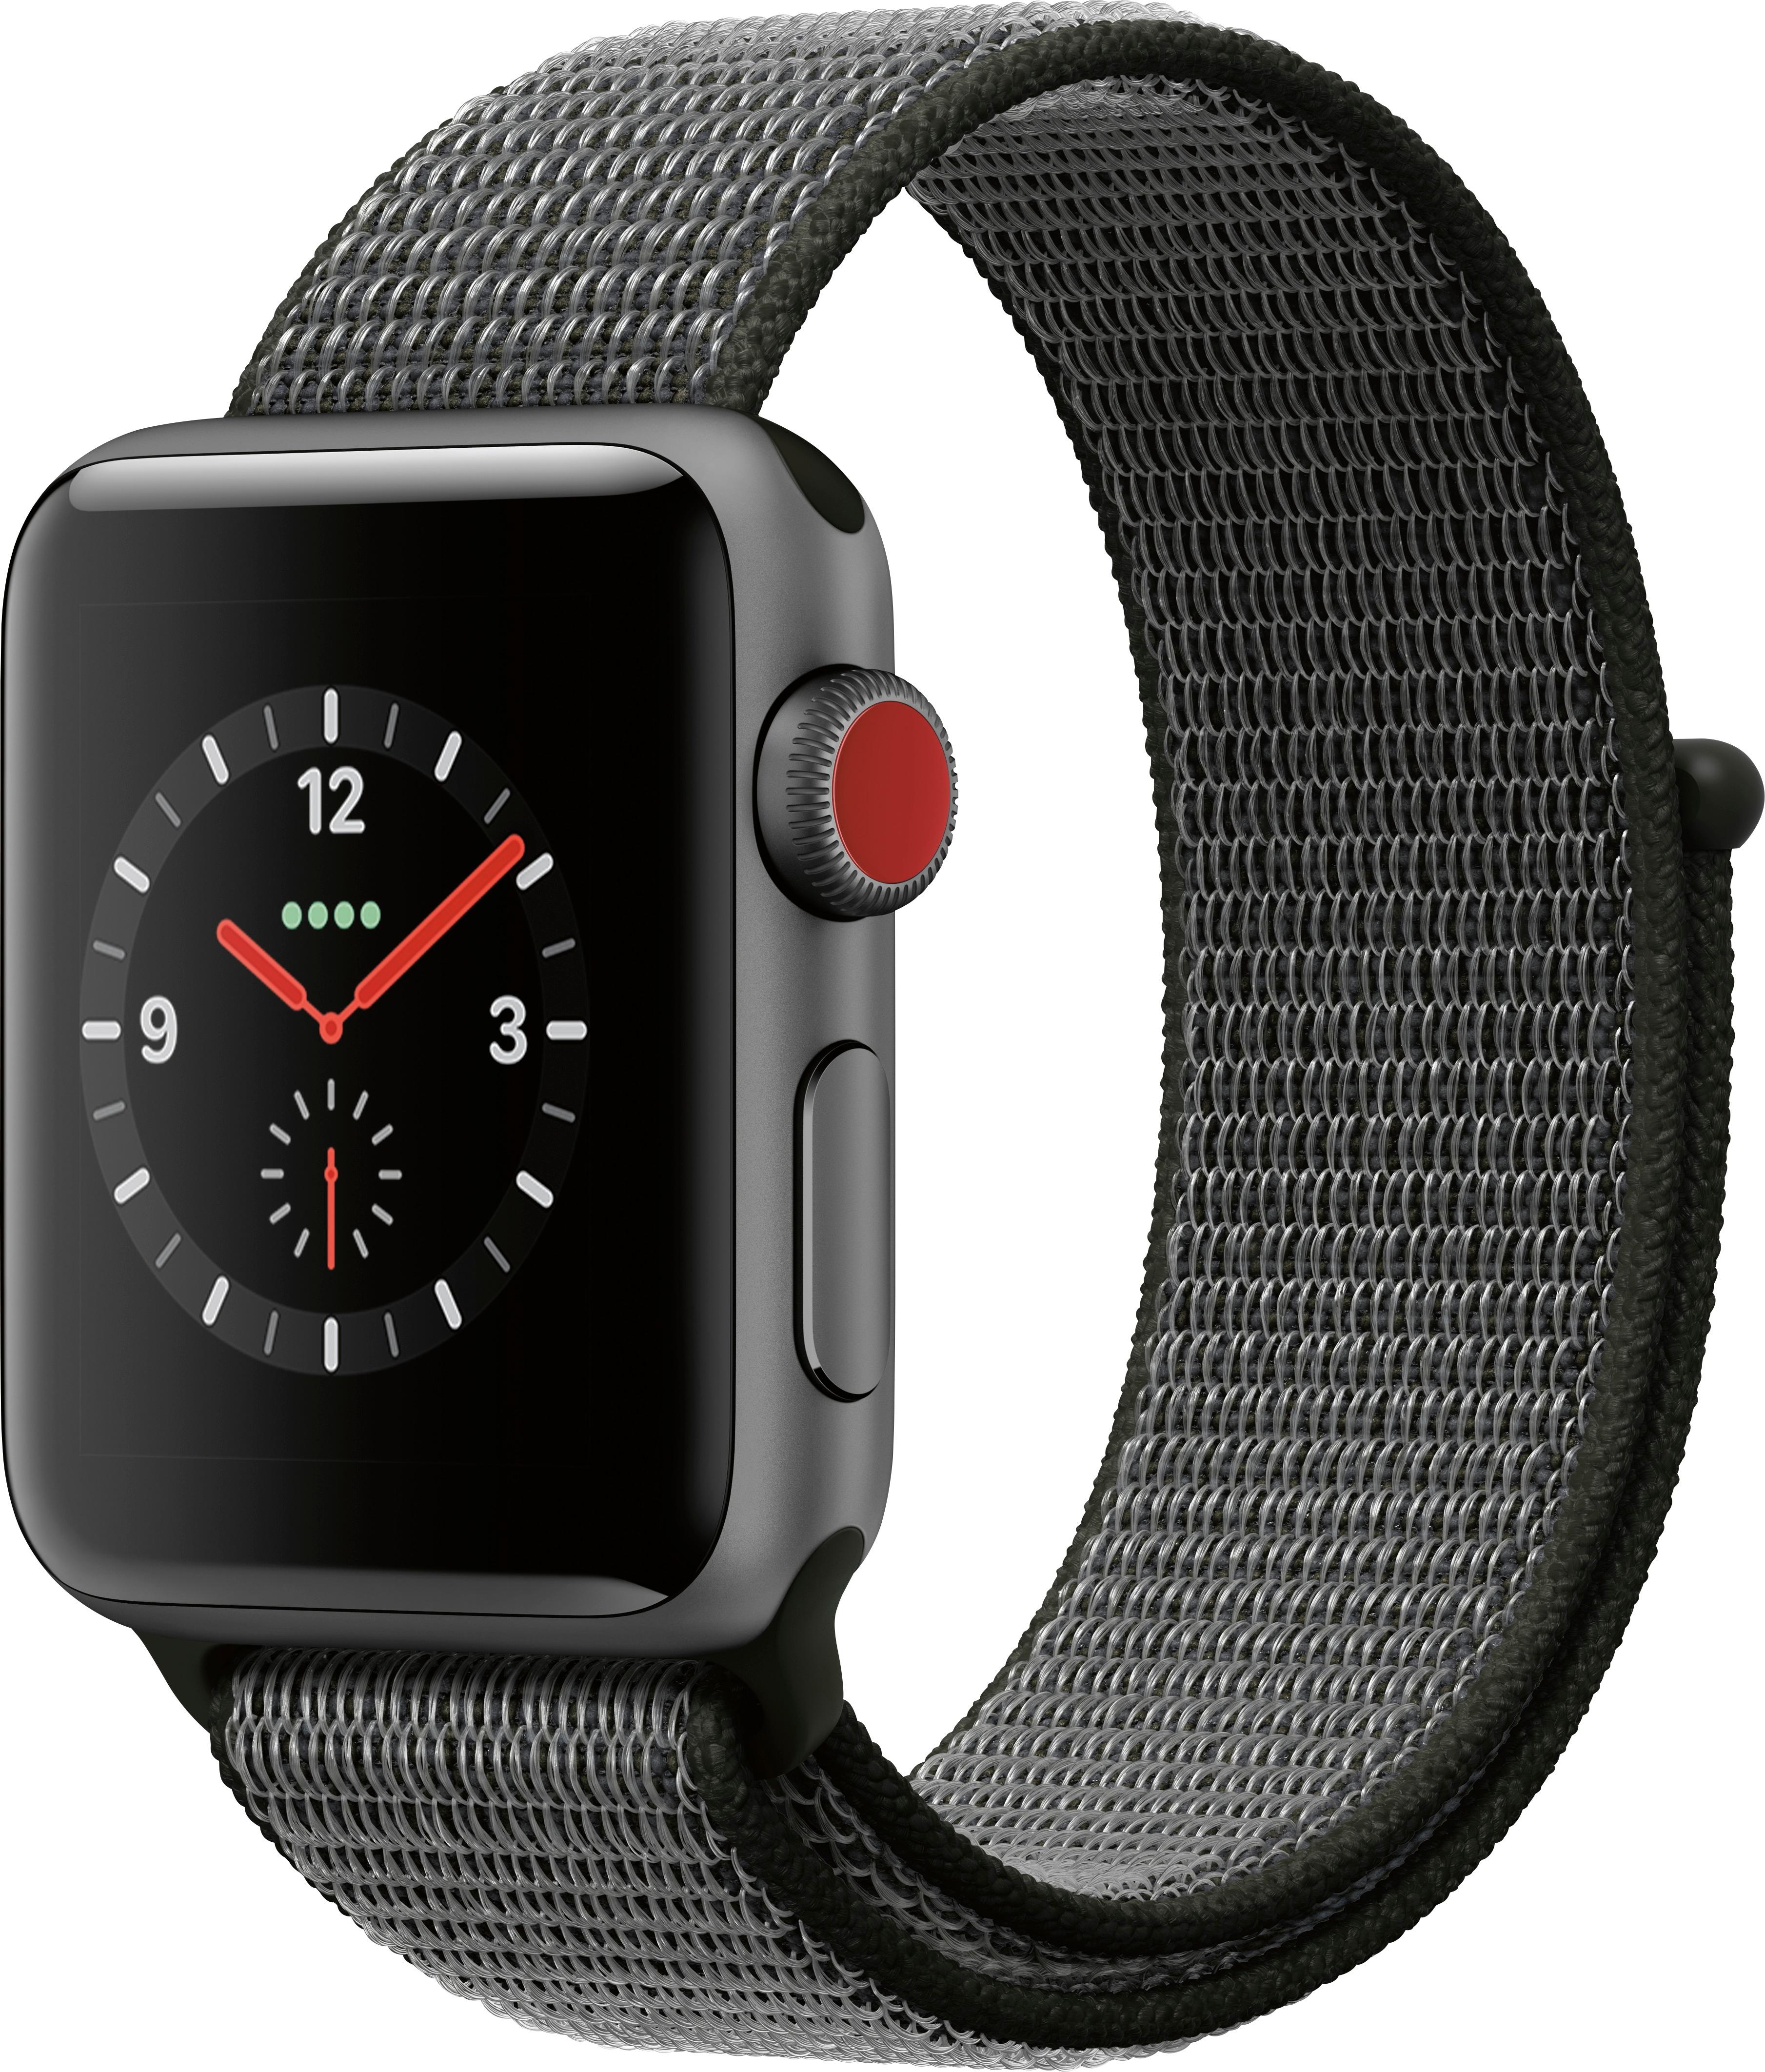 Apple Watch Series 3 (GPS + Cellular) 38mm Space Gray Aluminum